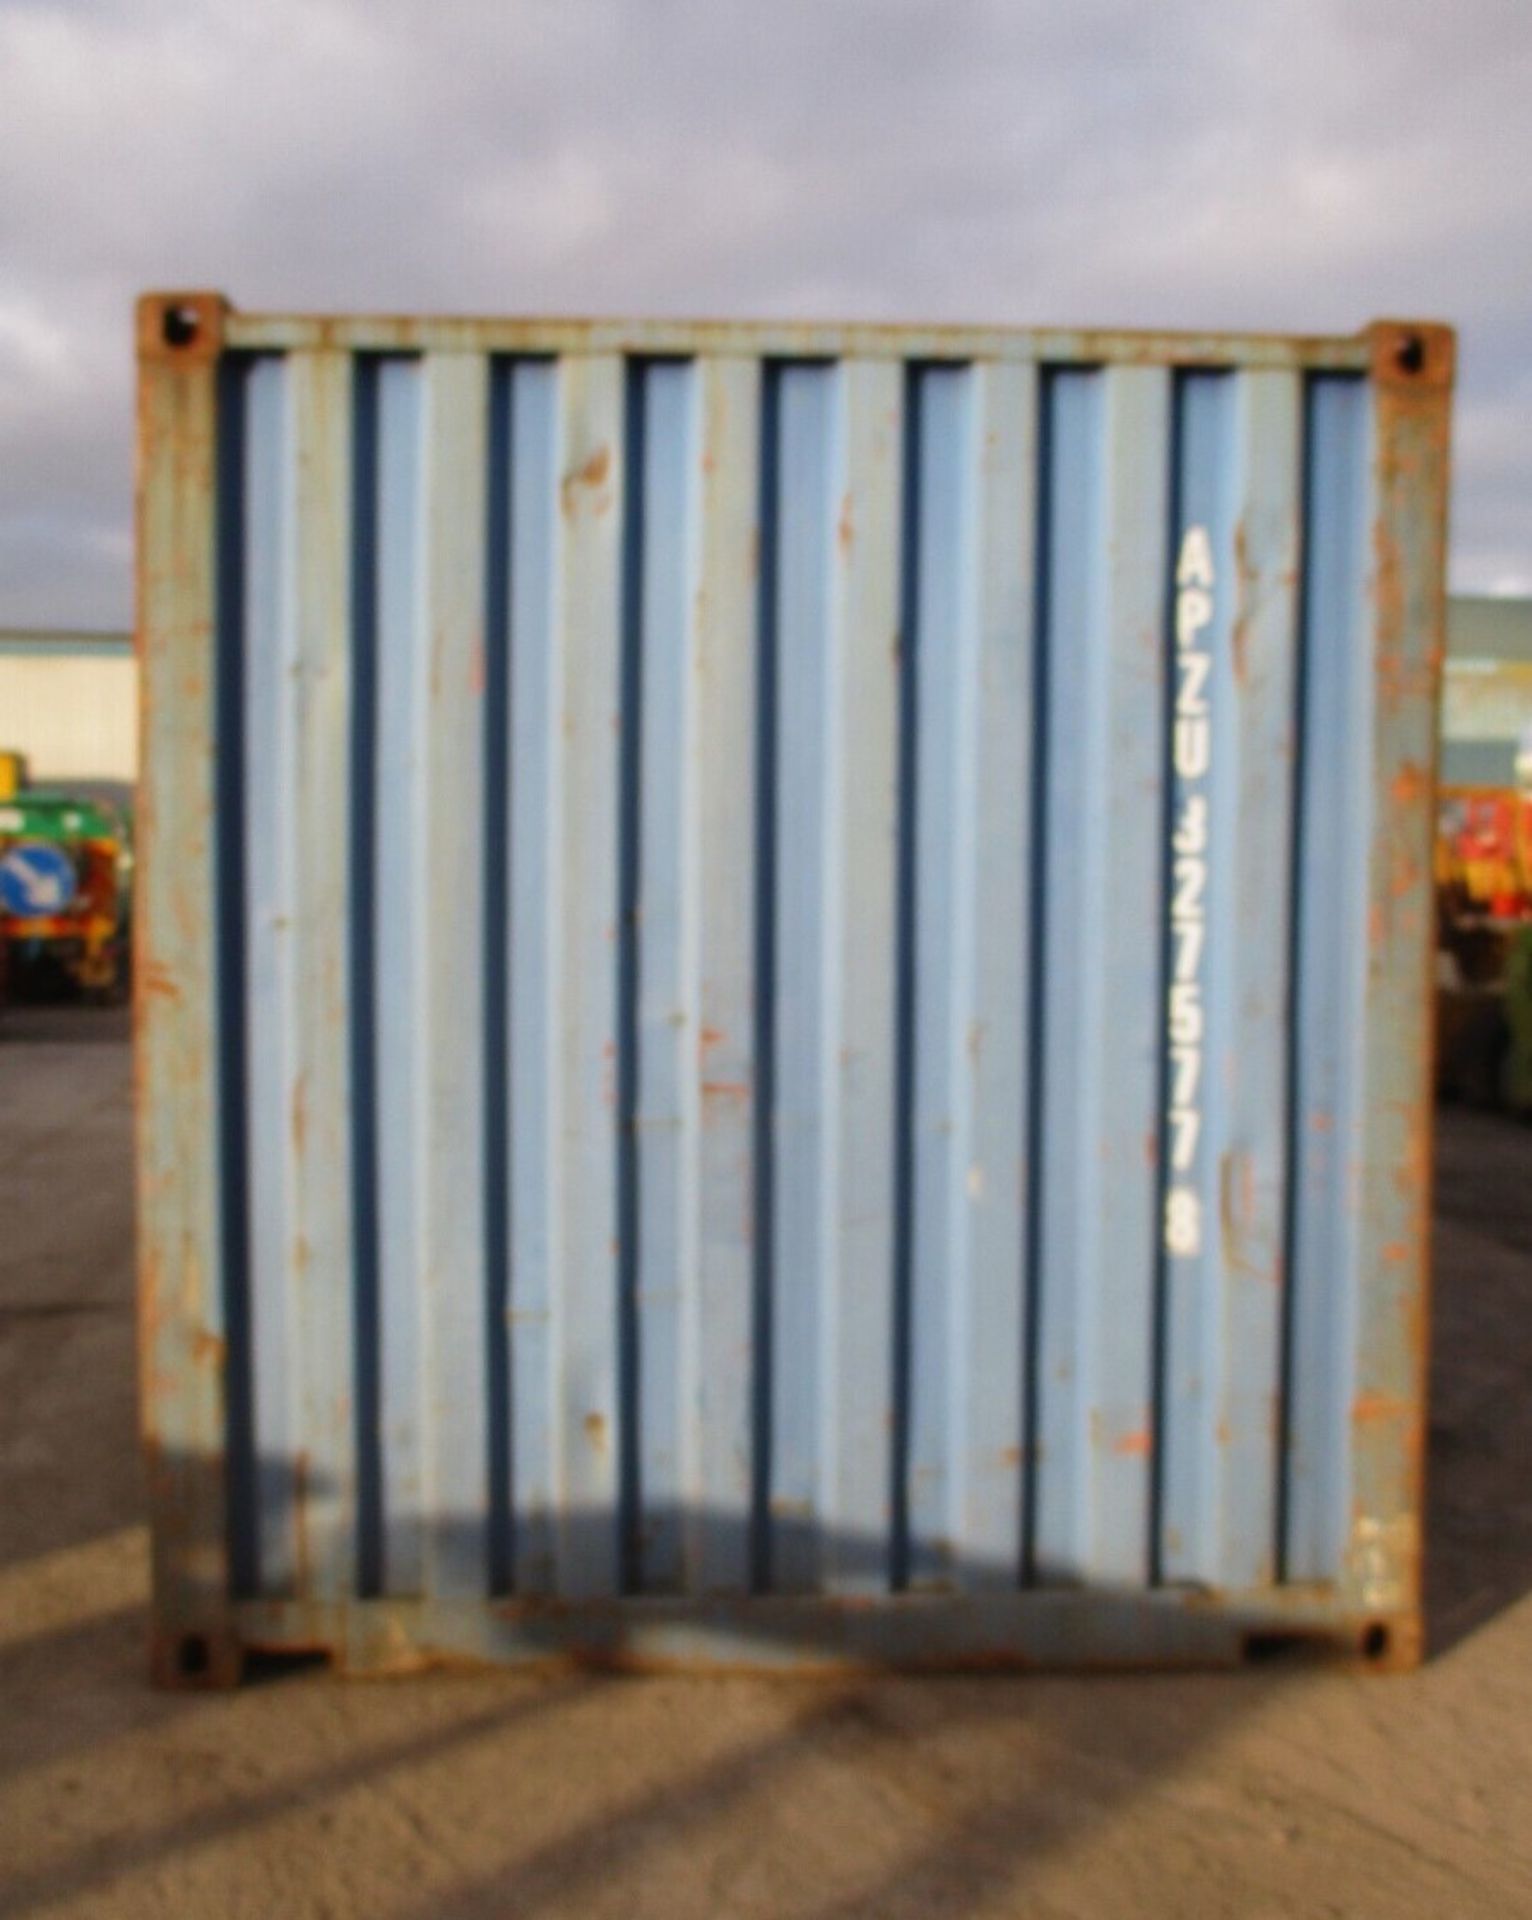 20 FEET LONG X 8 FEET WIDE SHIPPING CONTAINER: VERSATILE STORAGE SOLUTION - Image 3 of 10